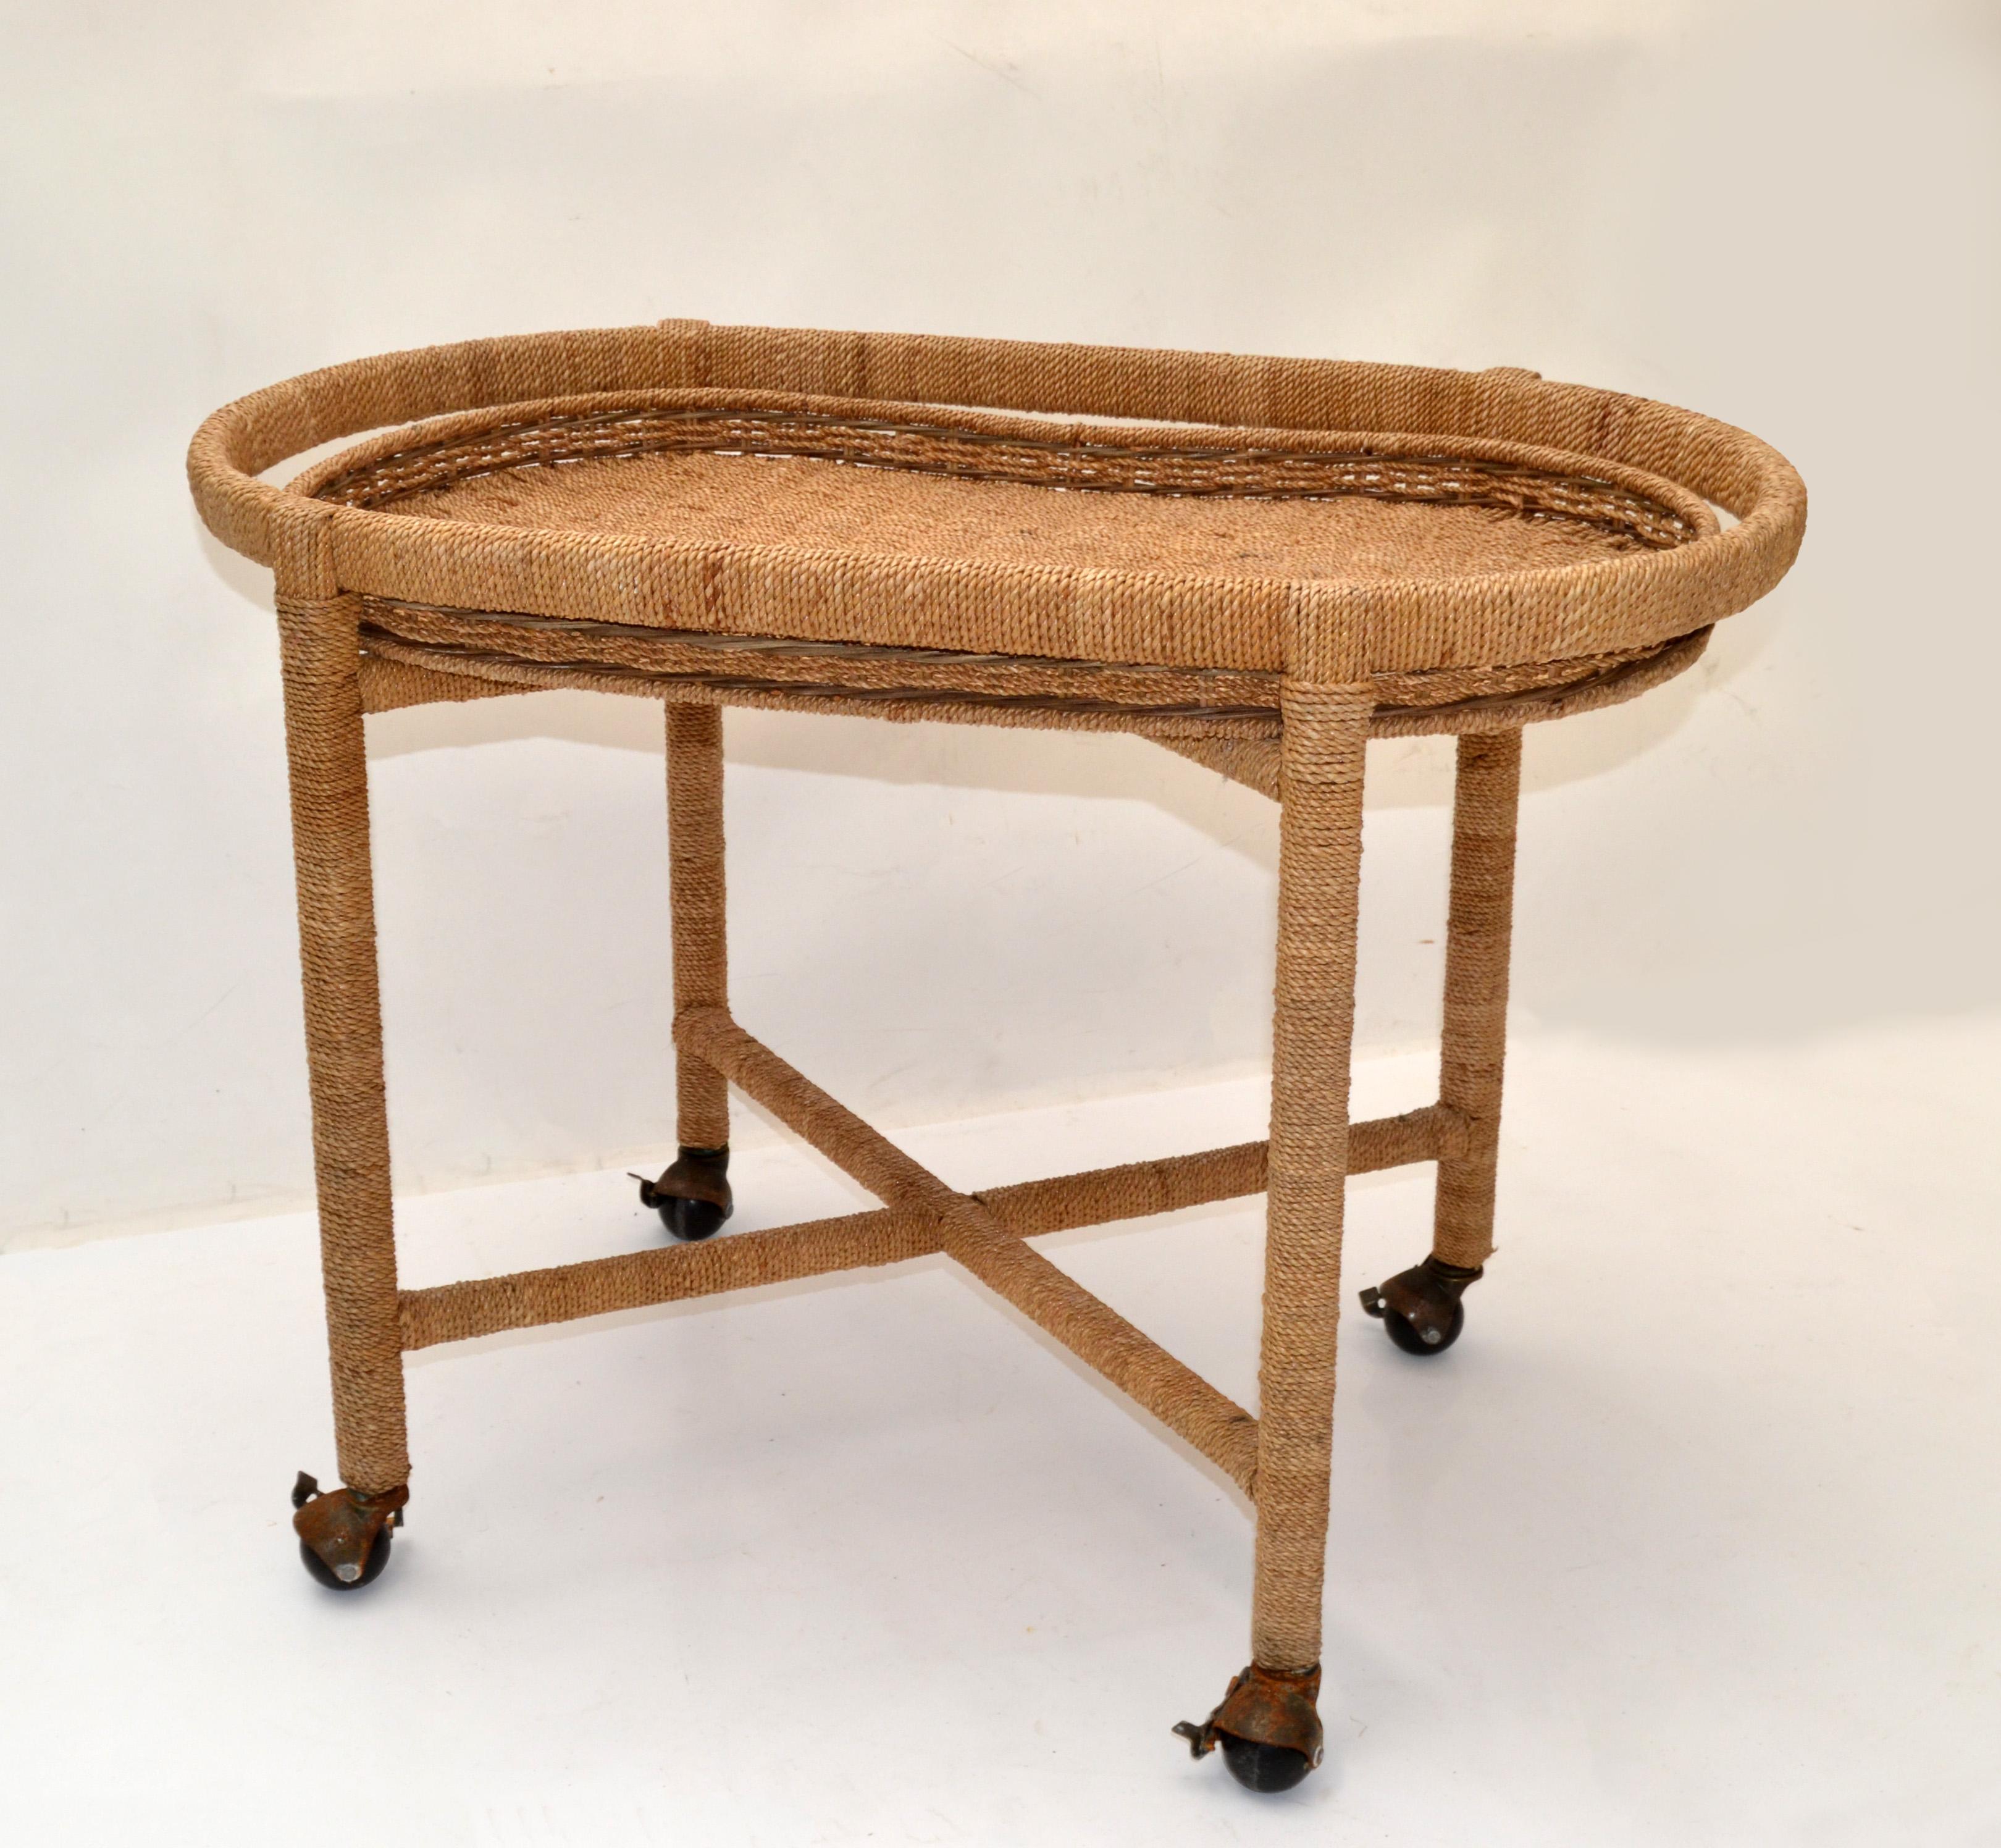 Vintage Mario Lopez Torres Style Rope Wicker Rattan Serving, Bar Cart Tray Table For Sale 1